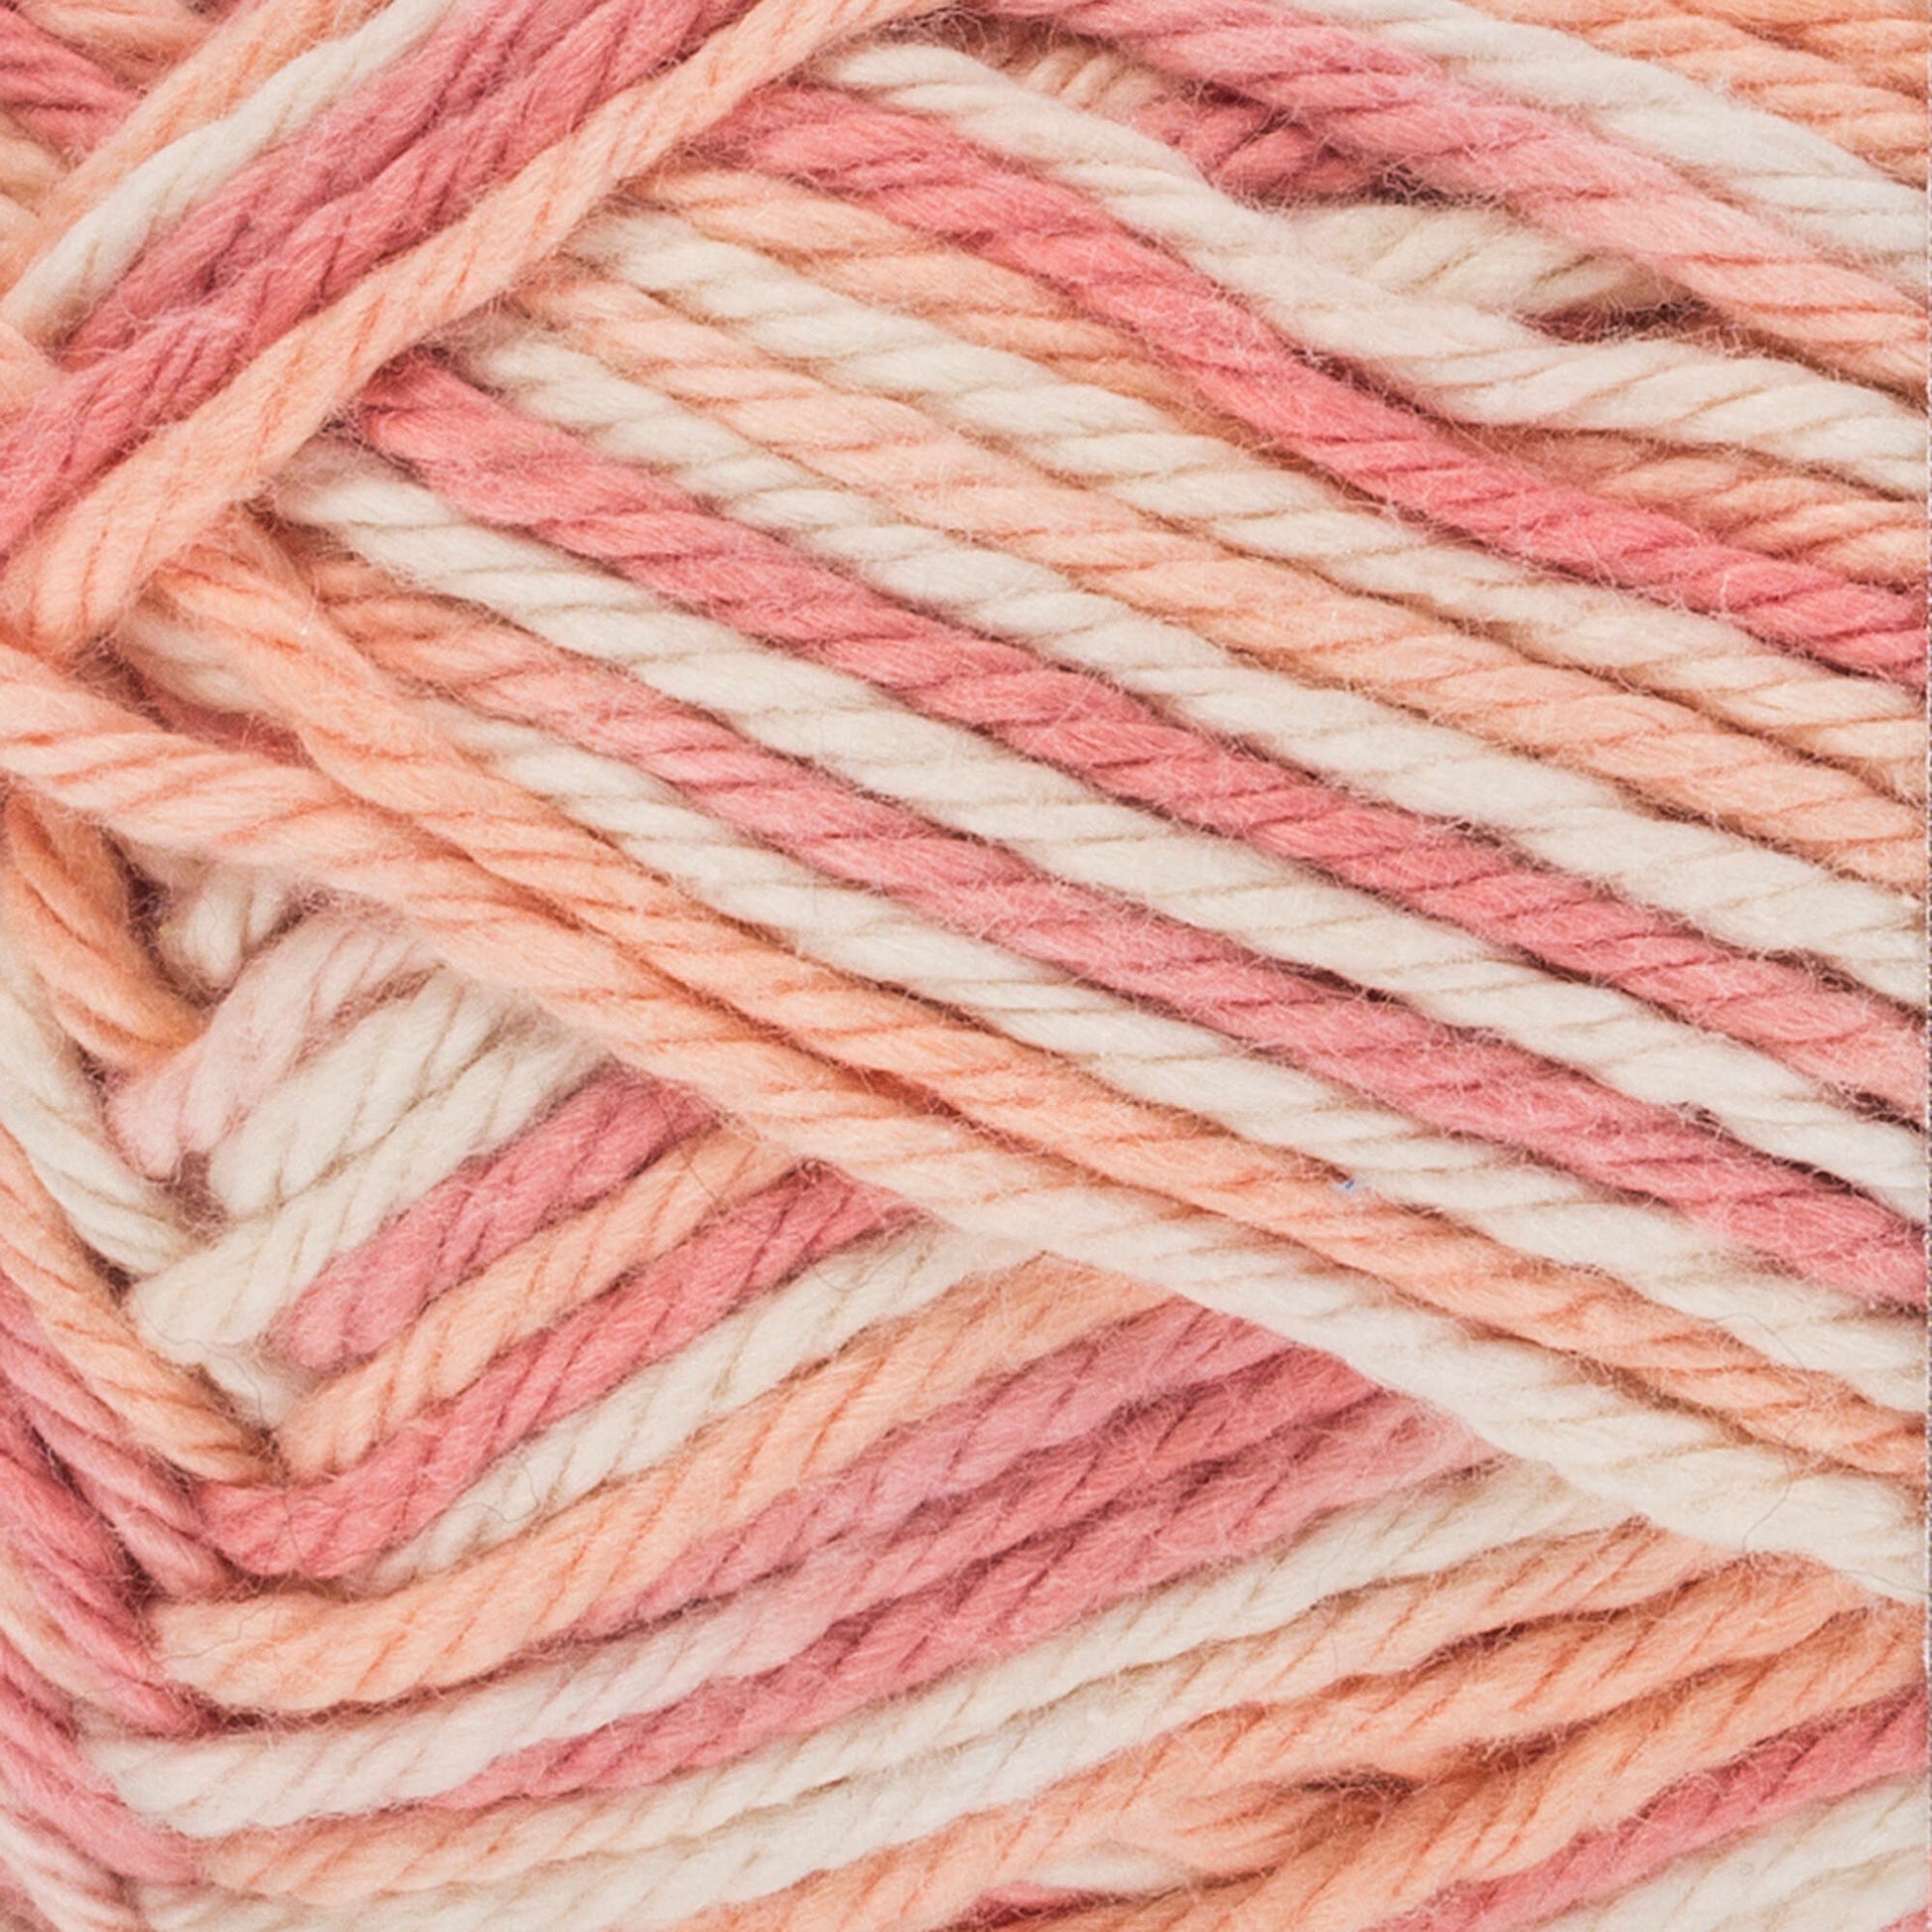 Red Heart Scrubby Smoothie Yarn - Discontinued shades